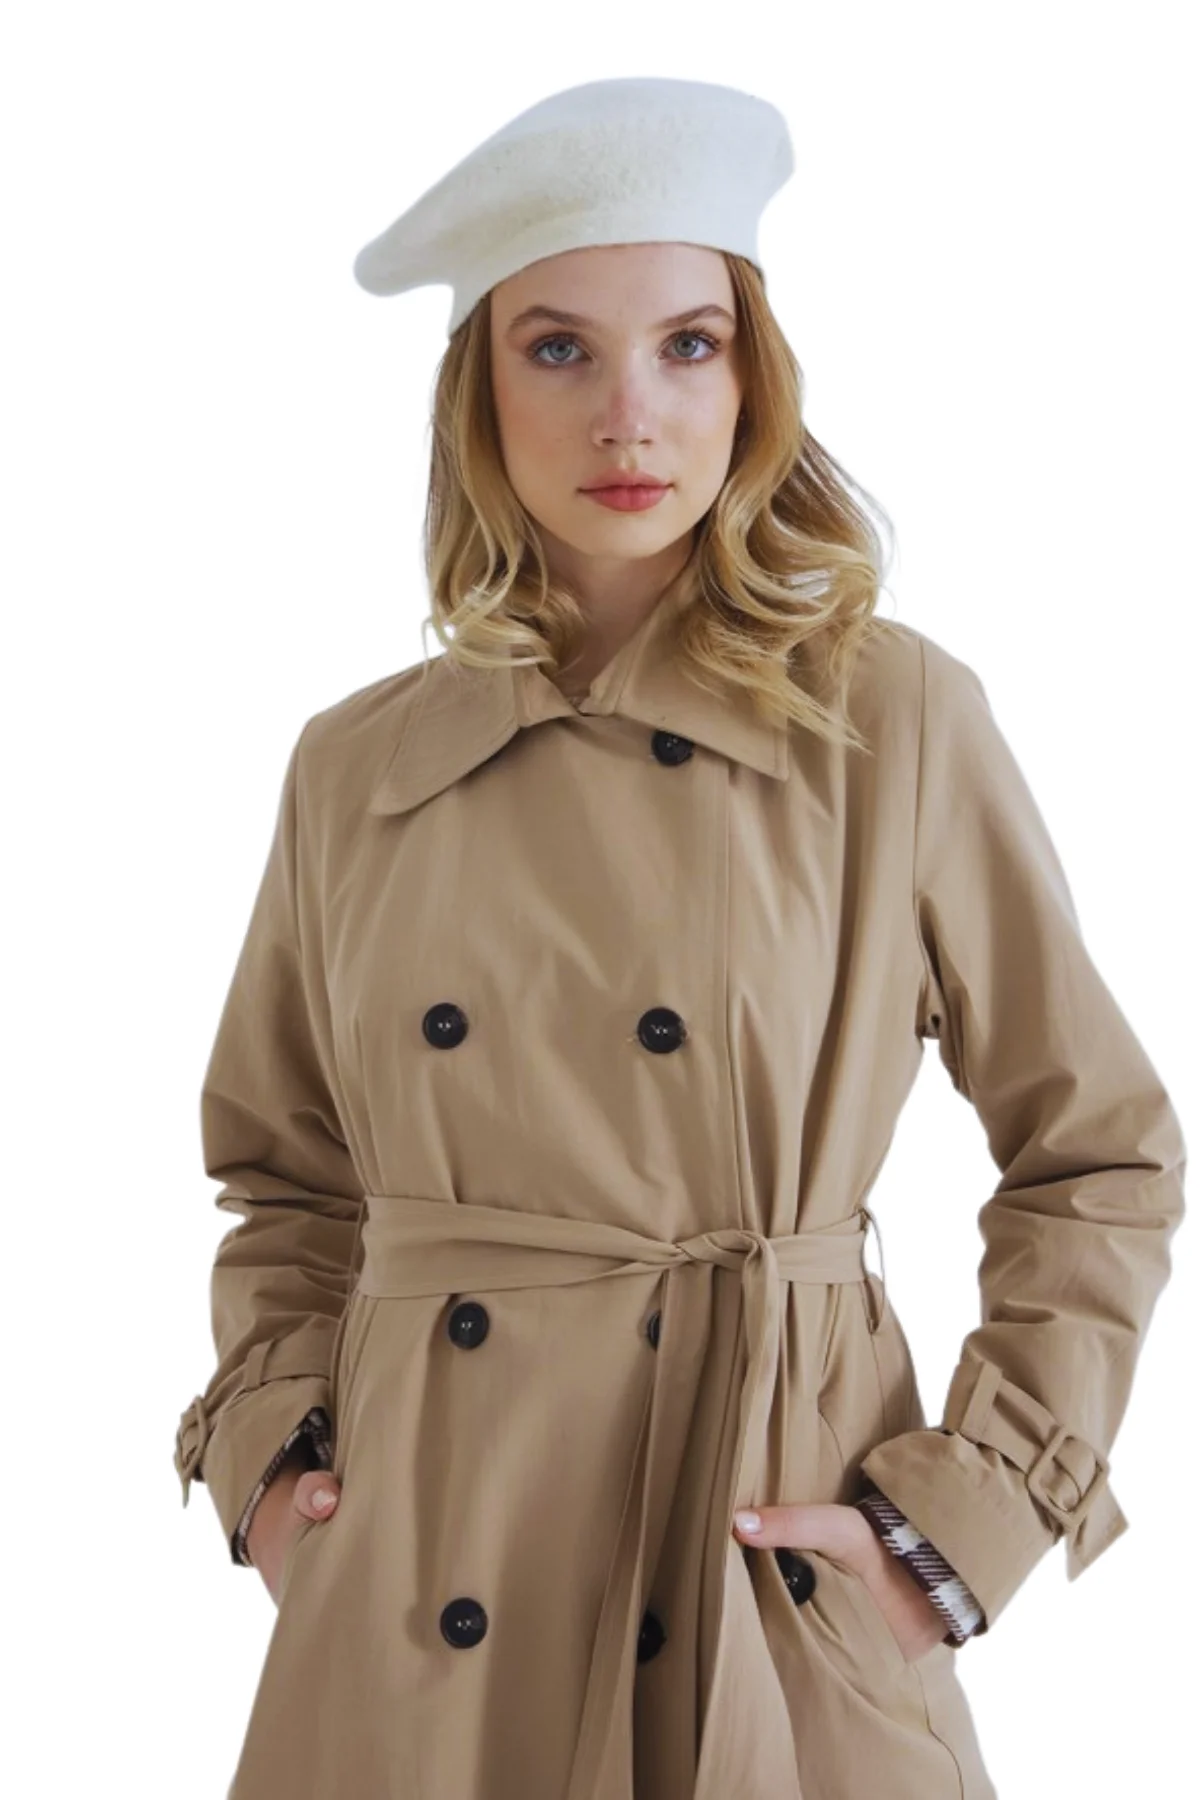 Copoint 2022 Spring Long Trench Coat Women Double Breasted Slim Trench Coat Female Outwear Fashion Windbreaker